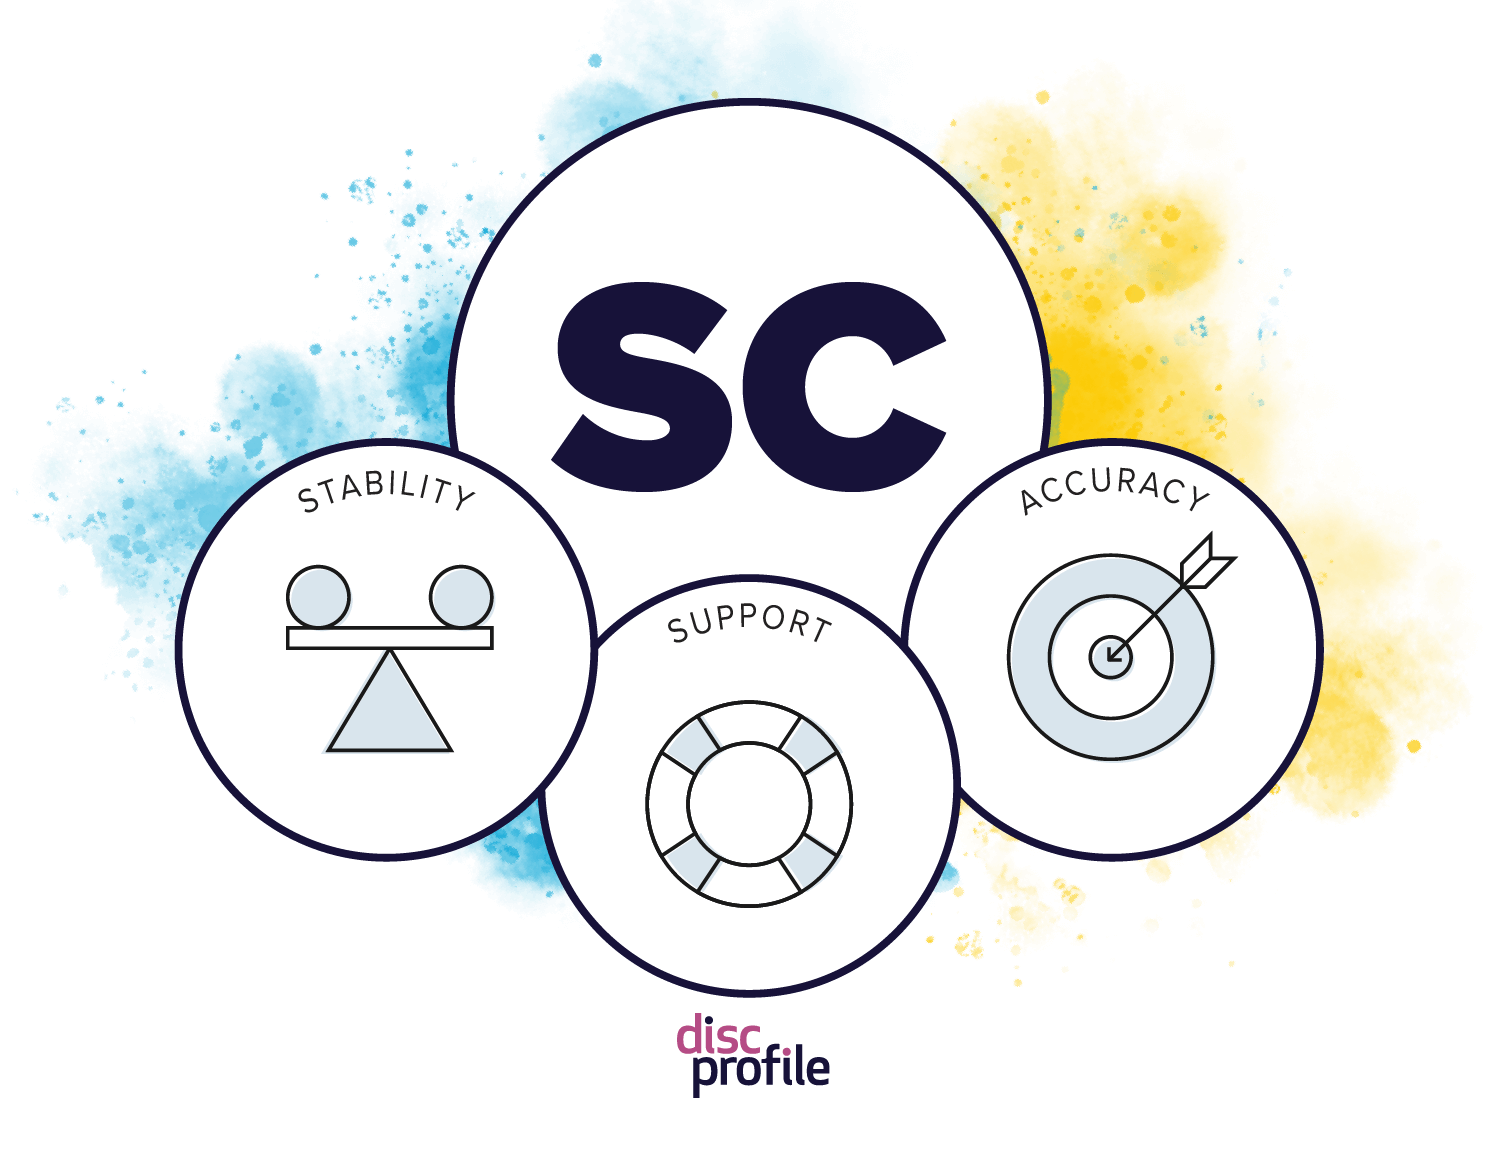 SC style graphic with priorities: stability, support, accuracy